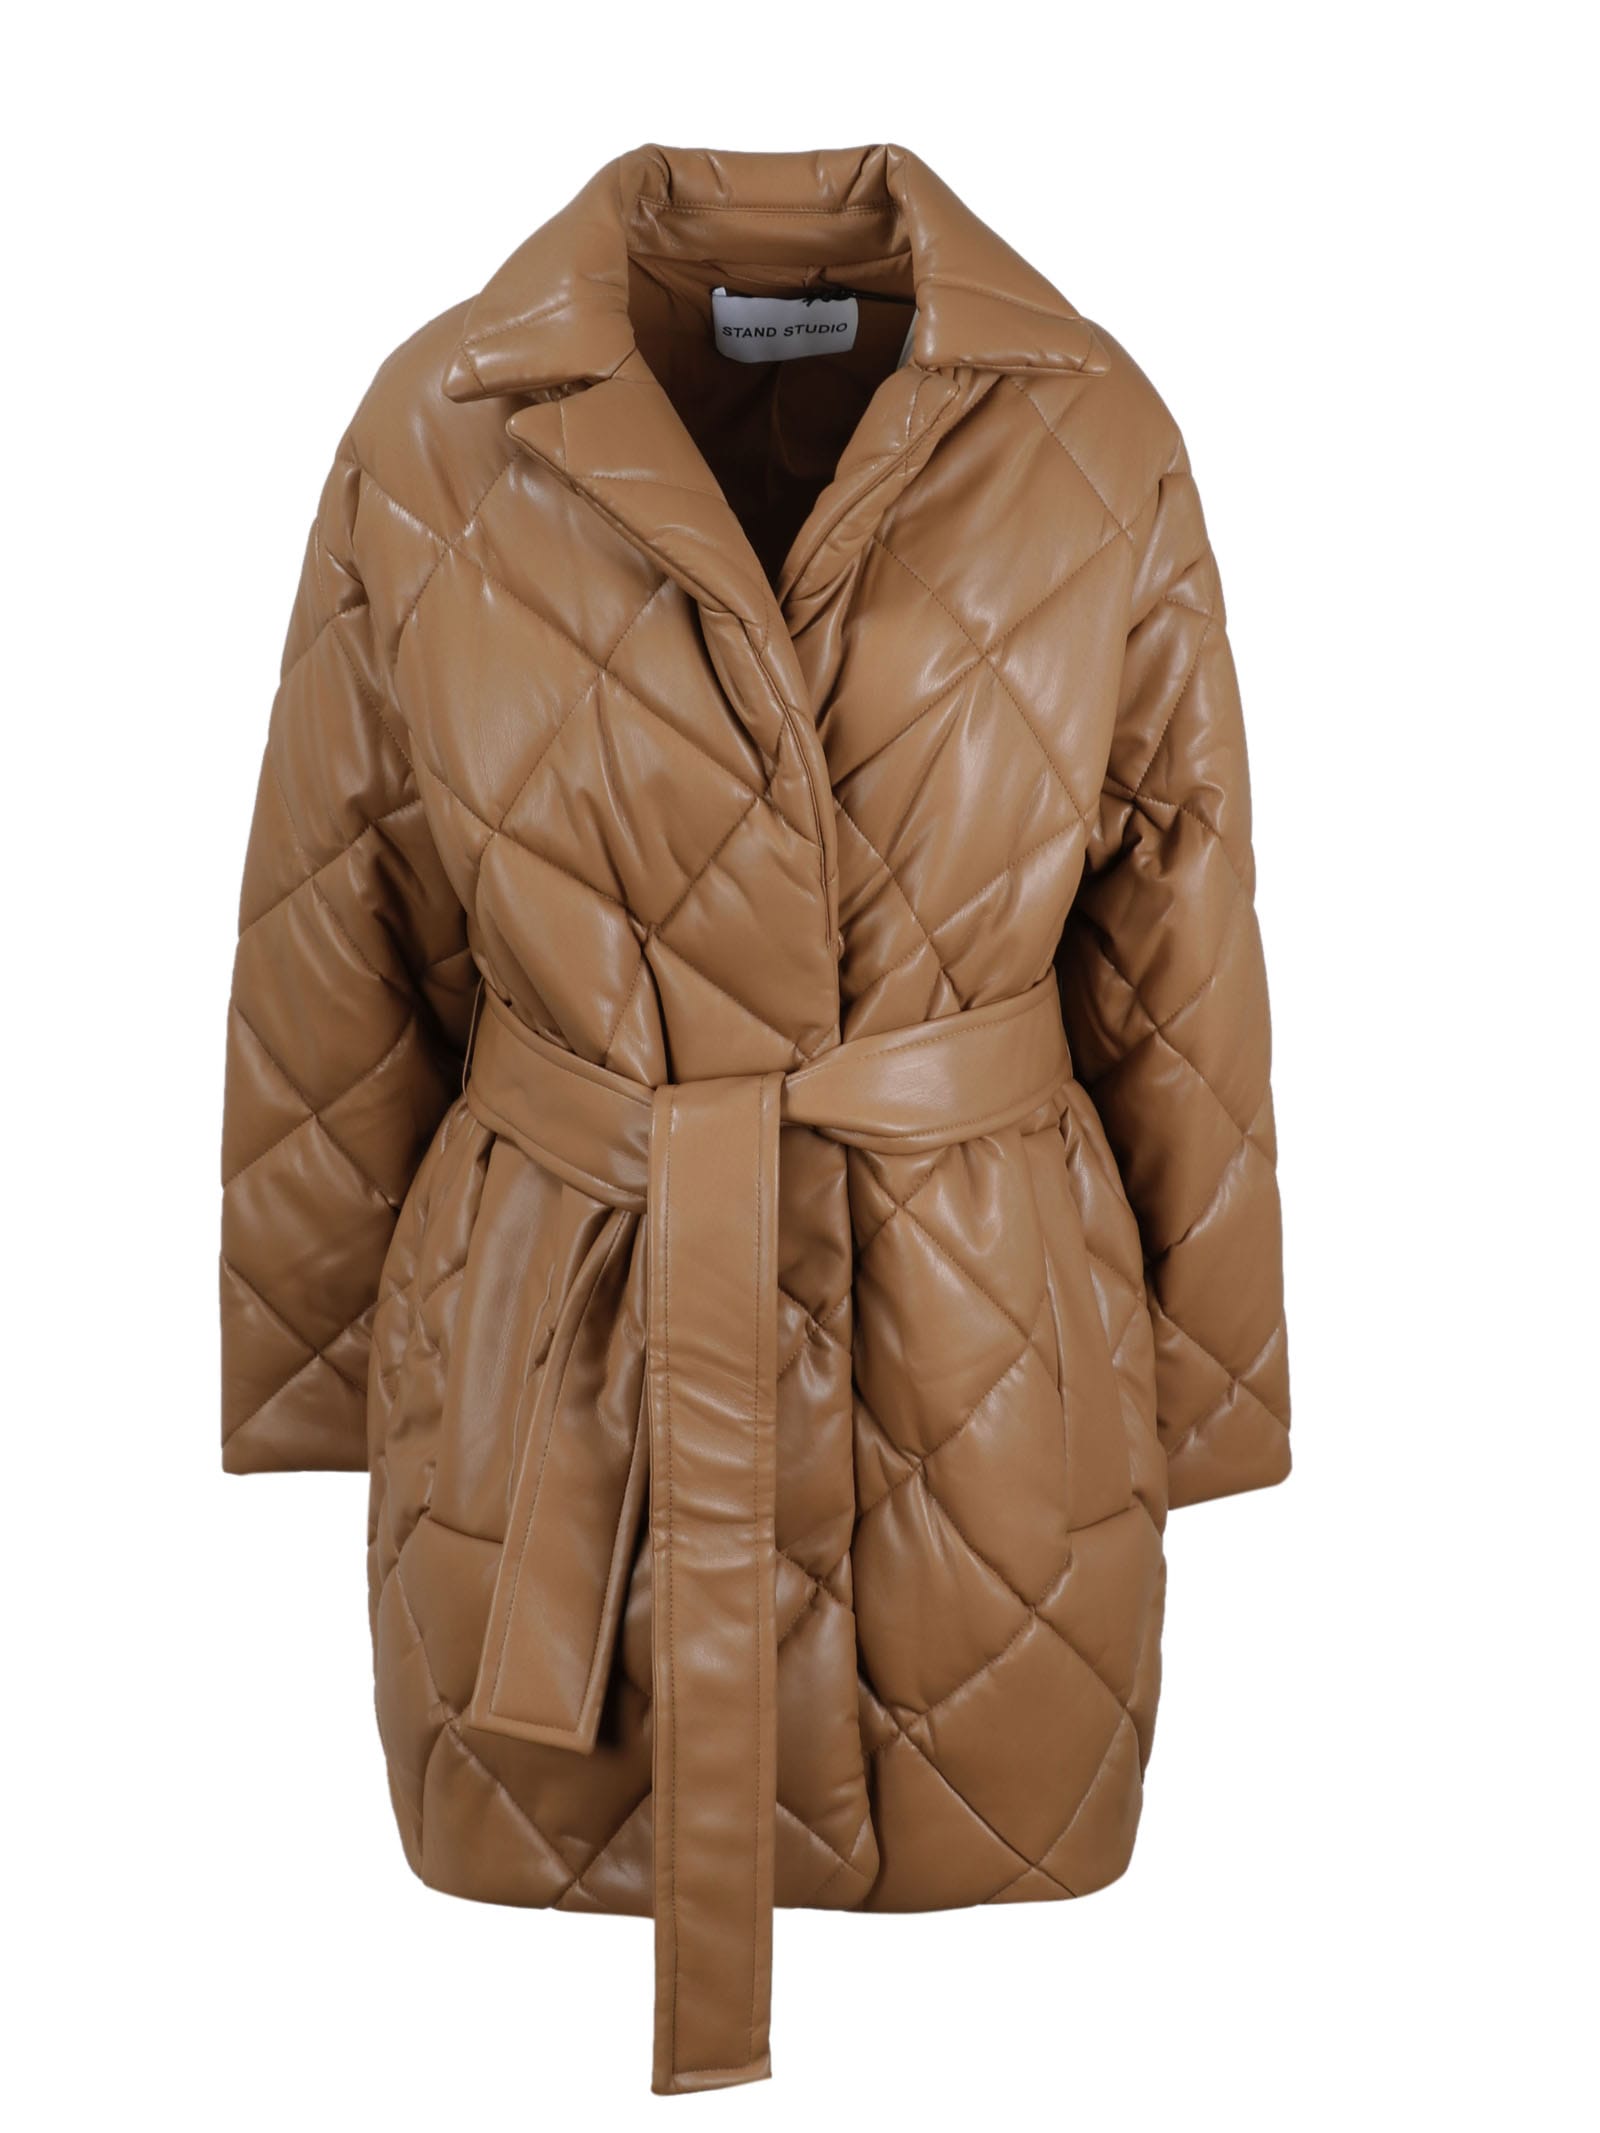 STAND STUDIO Maxim Quilted Jacket